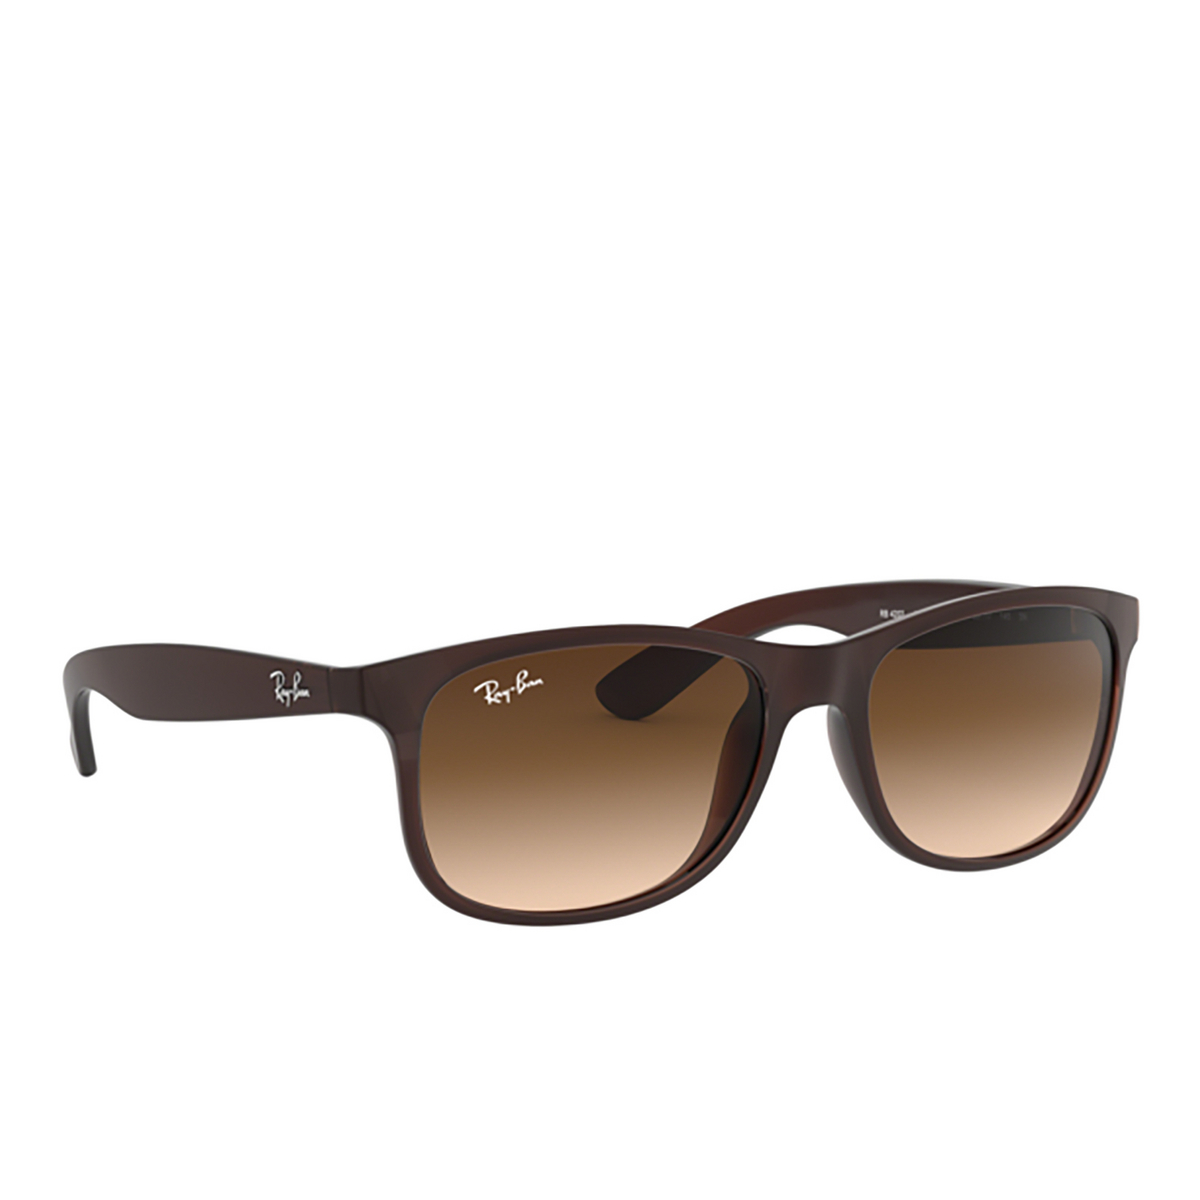 Ray-Ban ANDY Sunglasses 607313 MATTE BROWN ON BROWN - three-quarters view